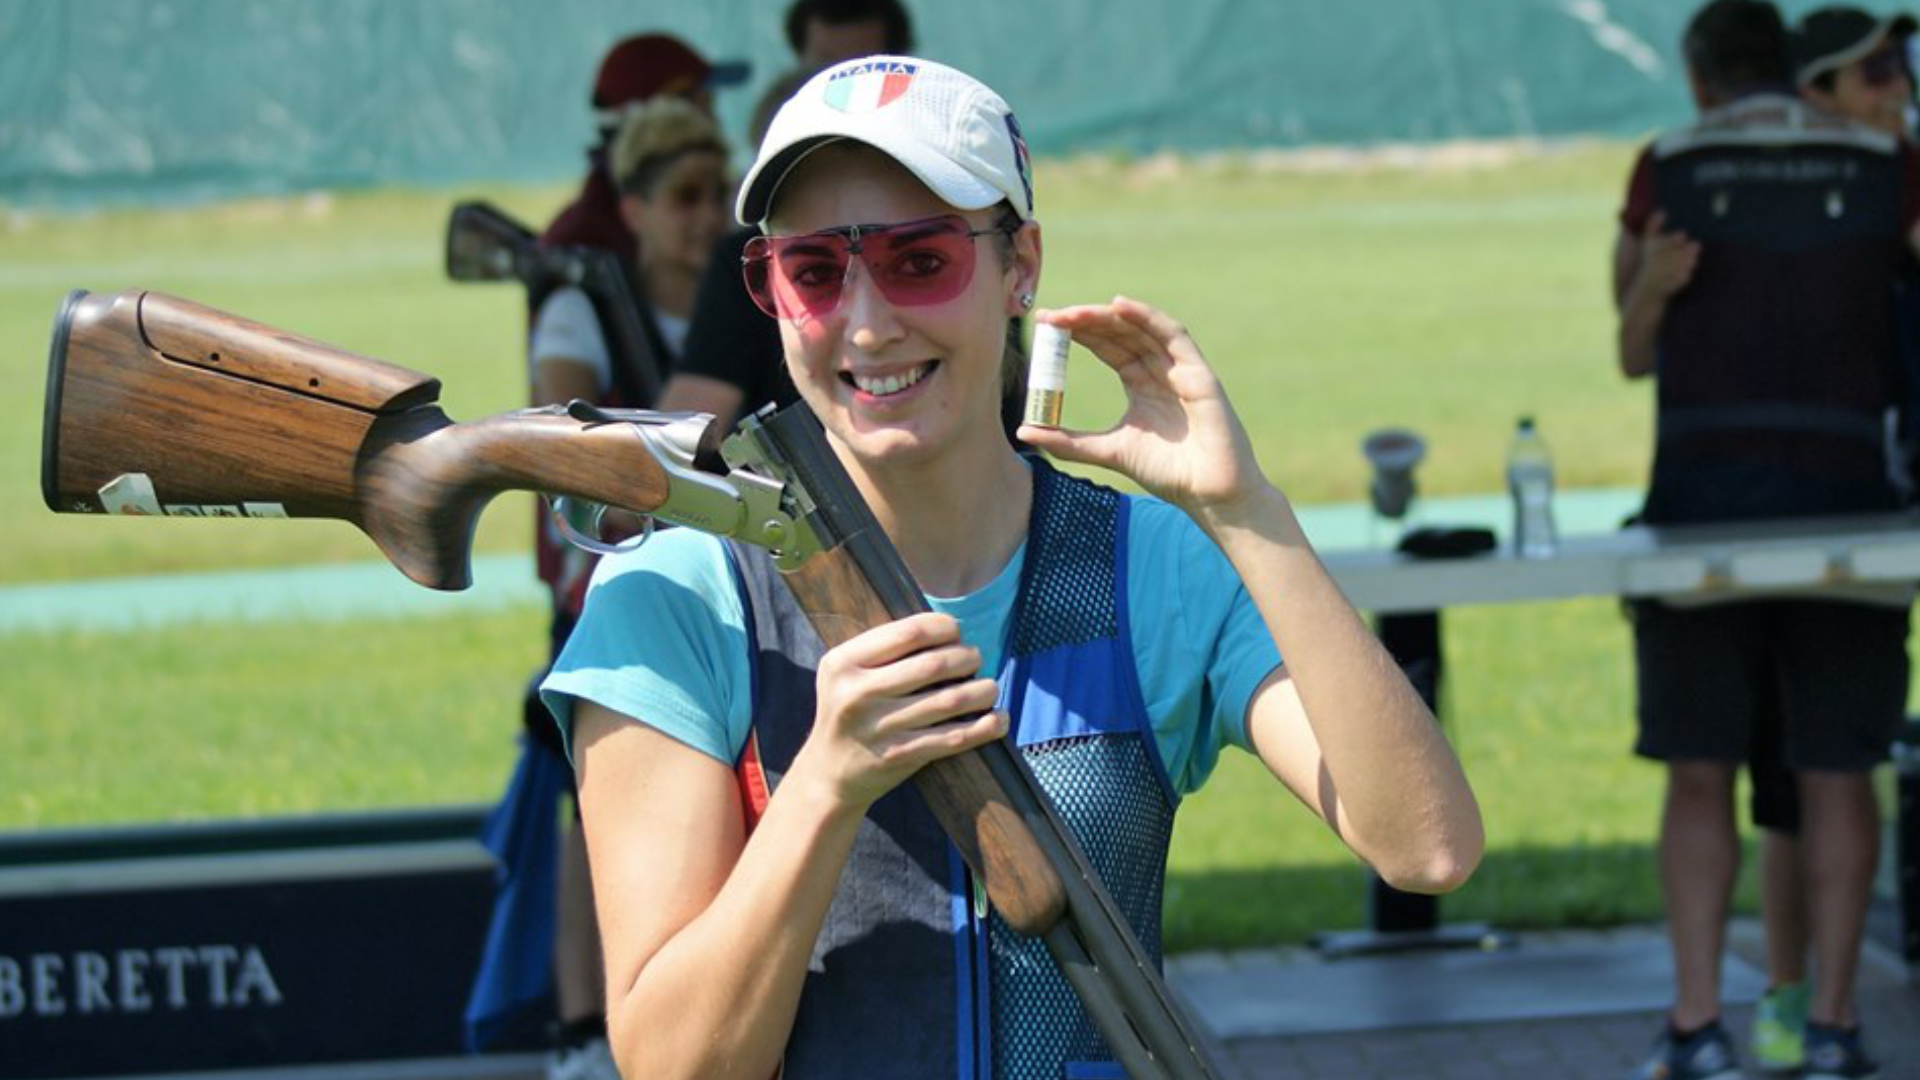 FIOCCHI REIGNS AT THE FITAV’S OLYMPIC TRAP GRAND PRIX